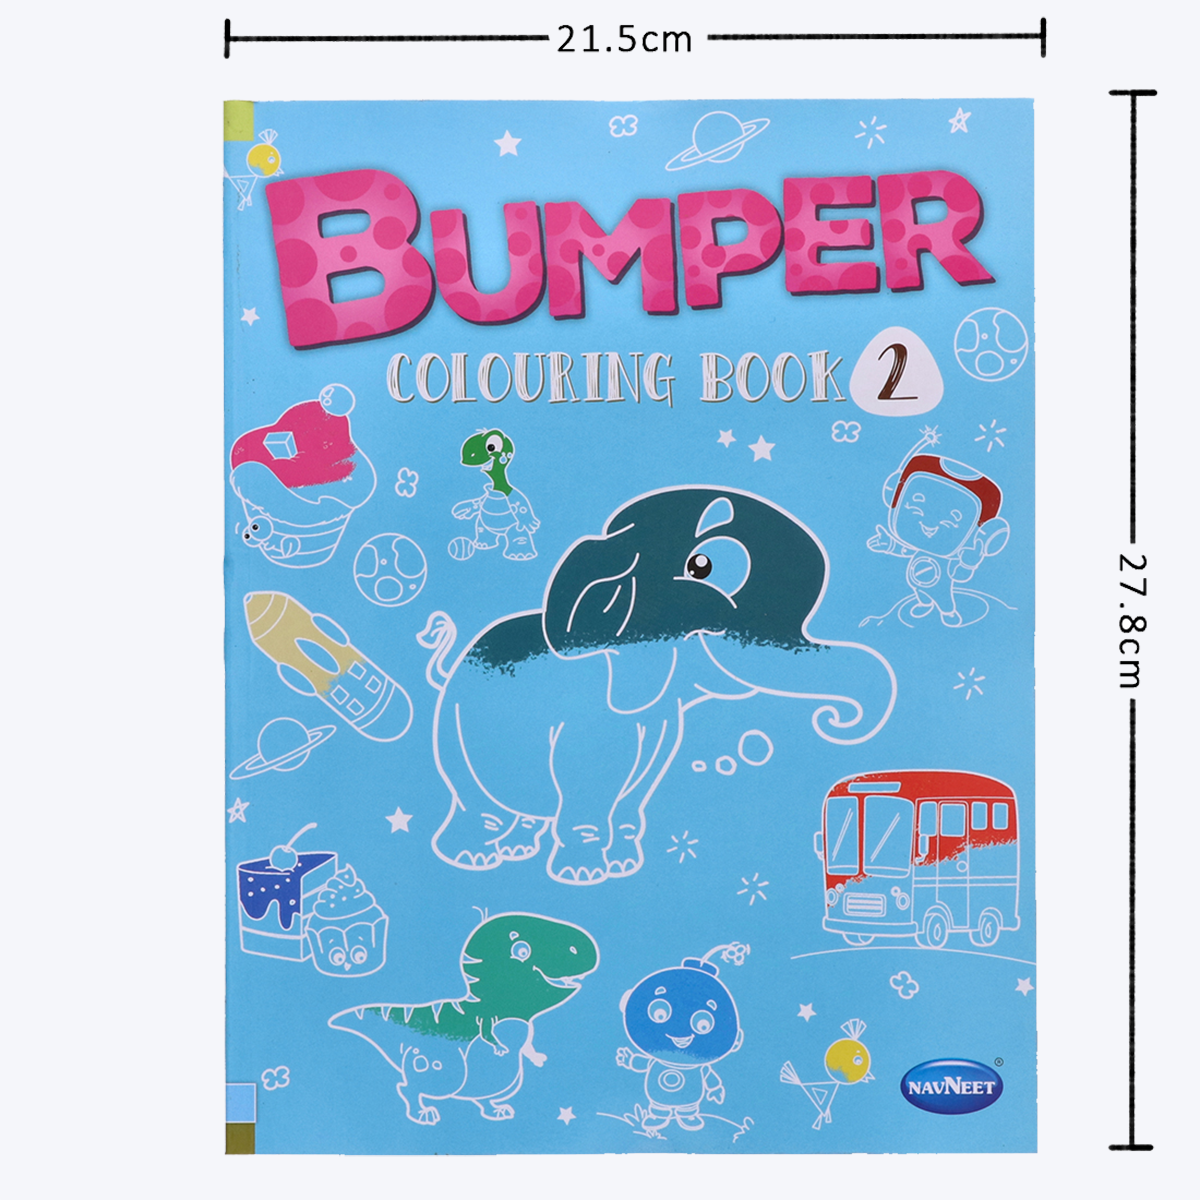 Navneet Bumper Colouring Book - 2 Best for Children Activity Youva Stationery- Crayon Colouring